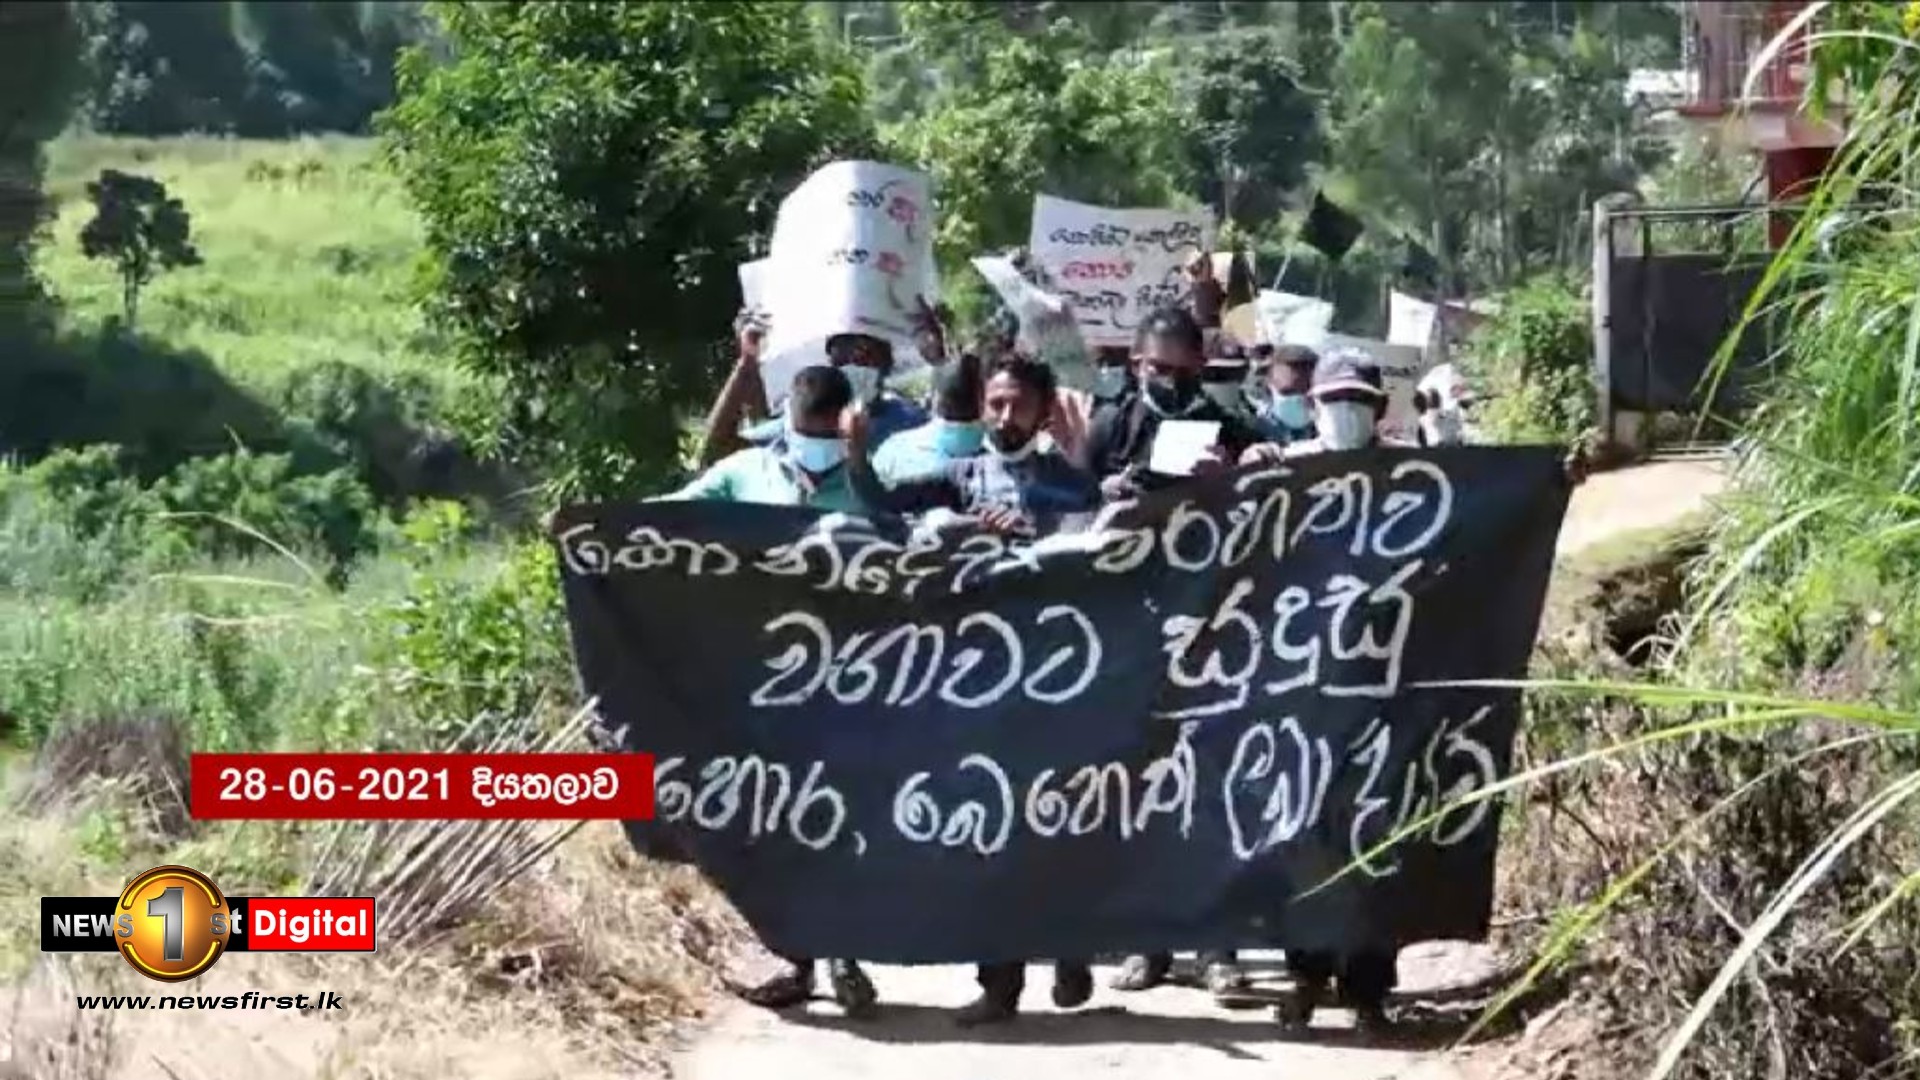 (PICTURES) Farmers protests rage across Sri Lanka